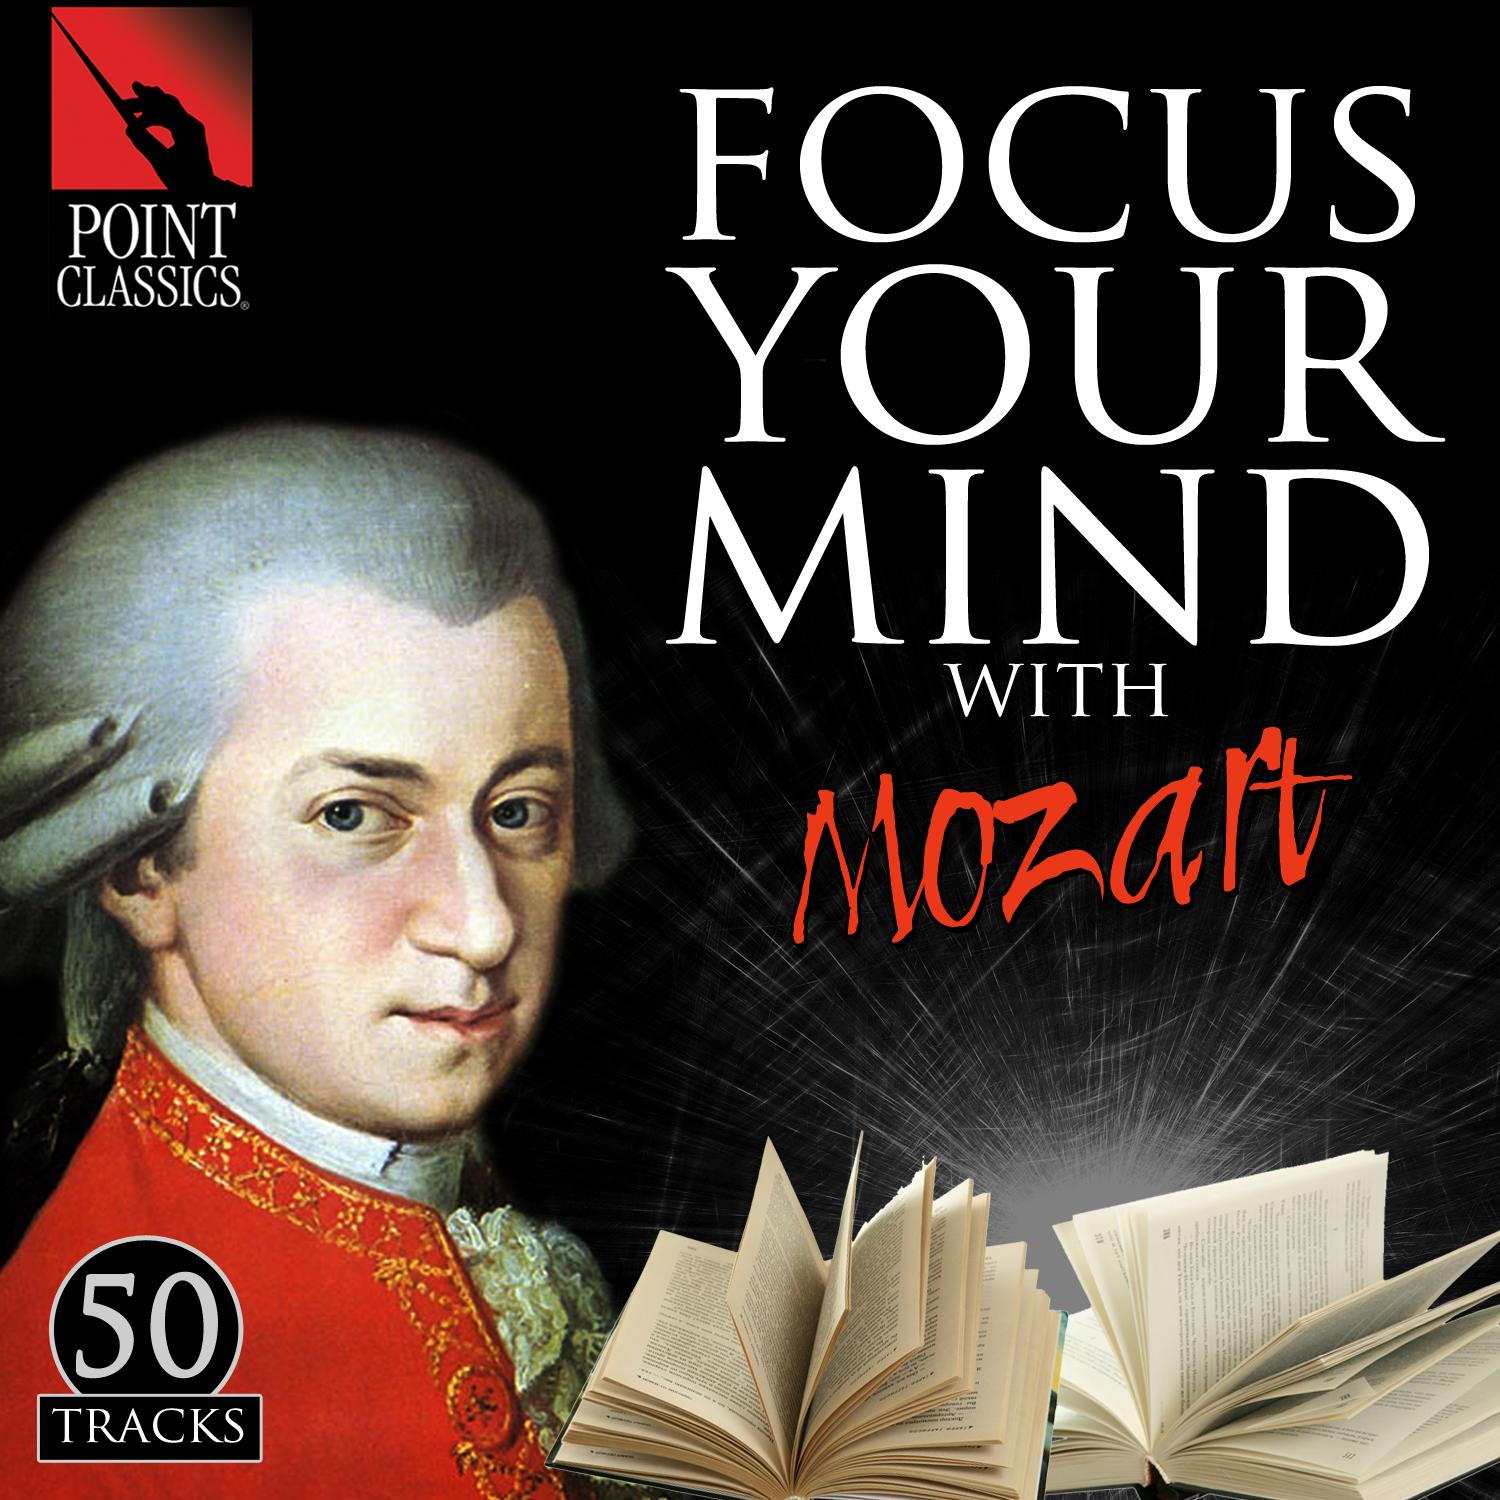 Focus Your Mind with Mozart: 50 Tracks